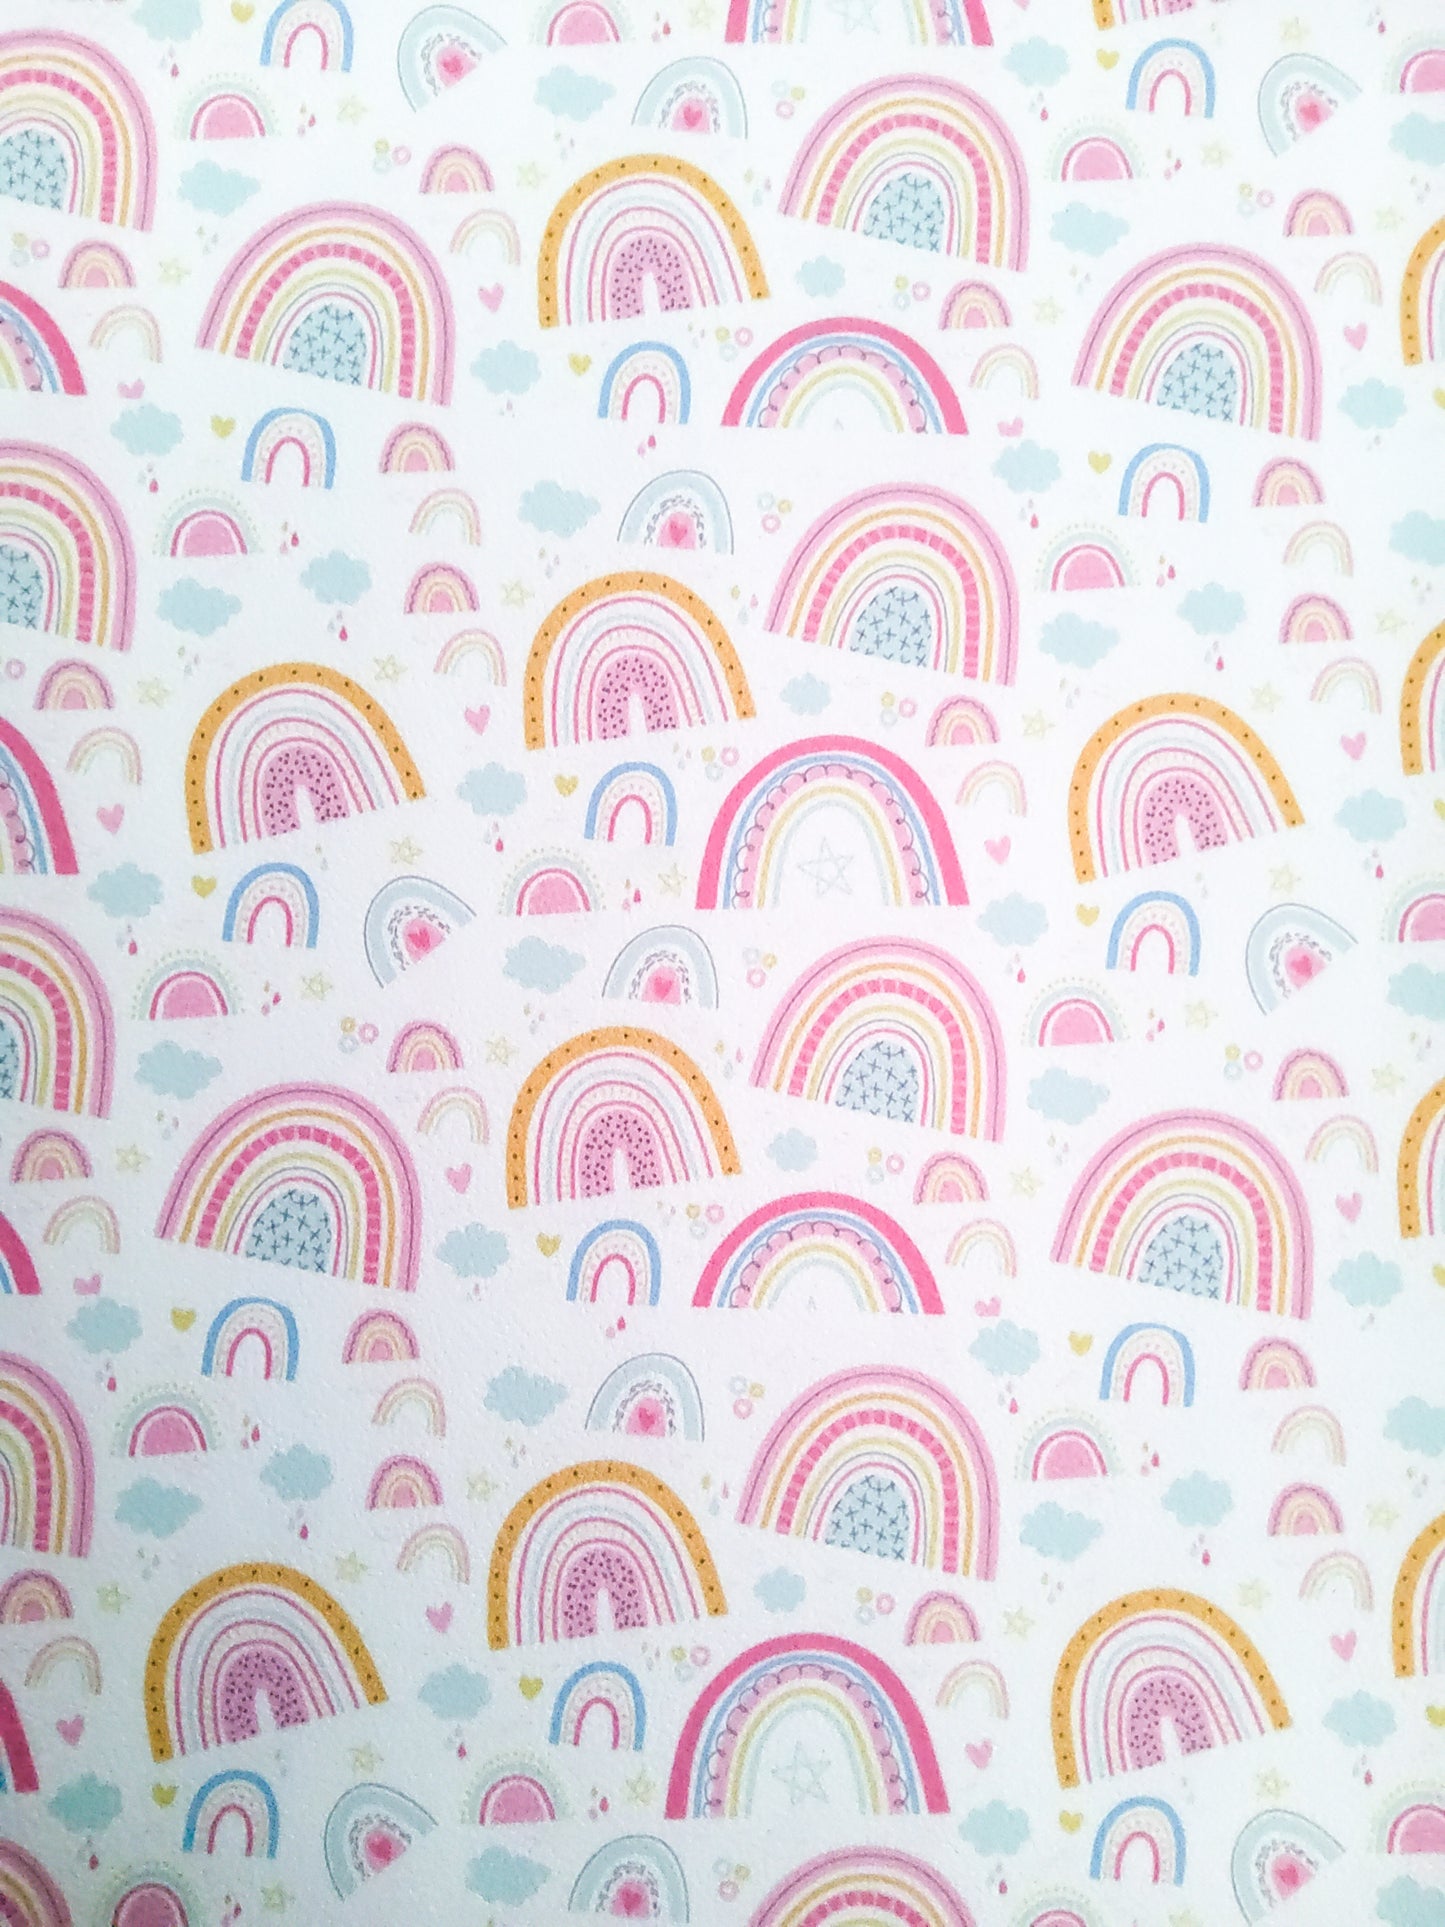 Large Rainbows 9x12 faux leather sheet